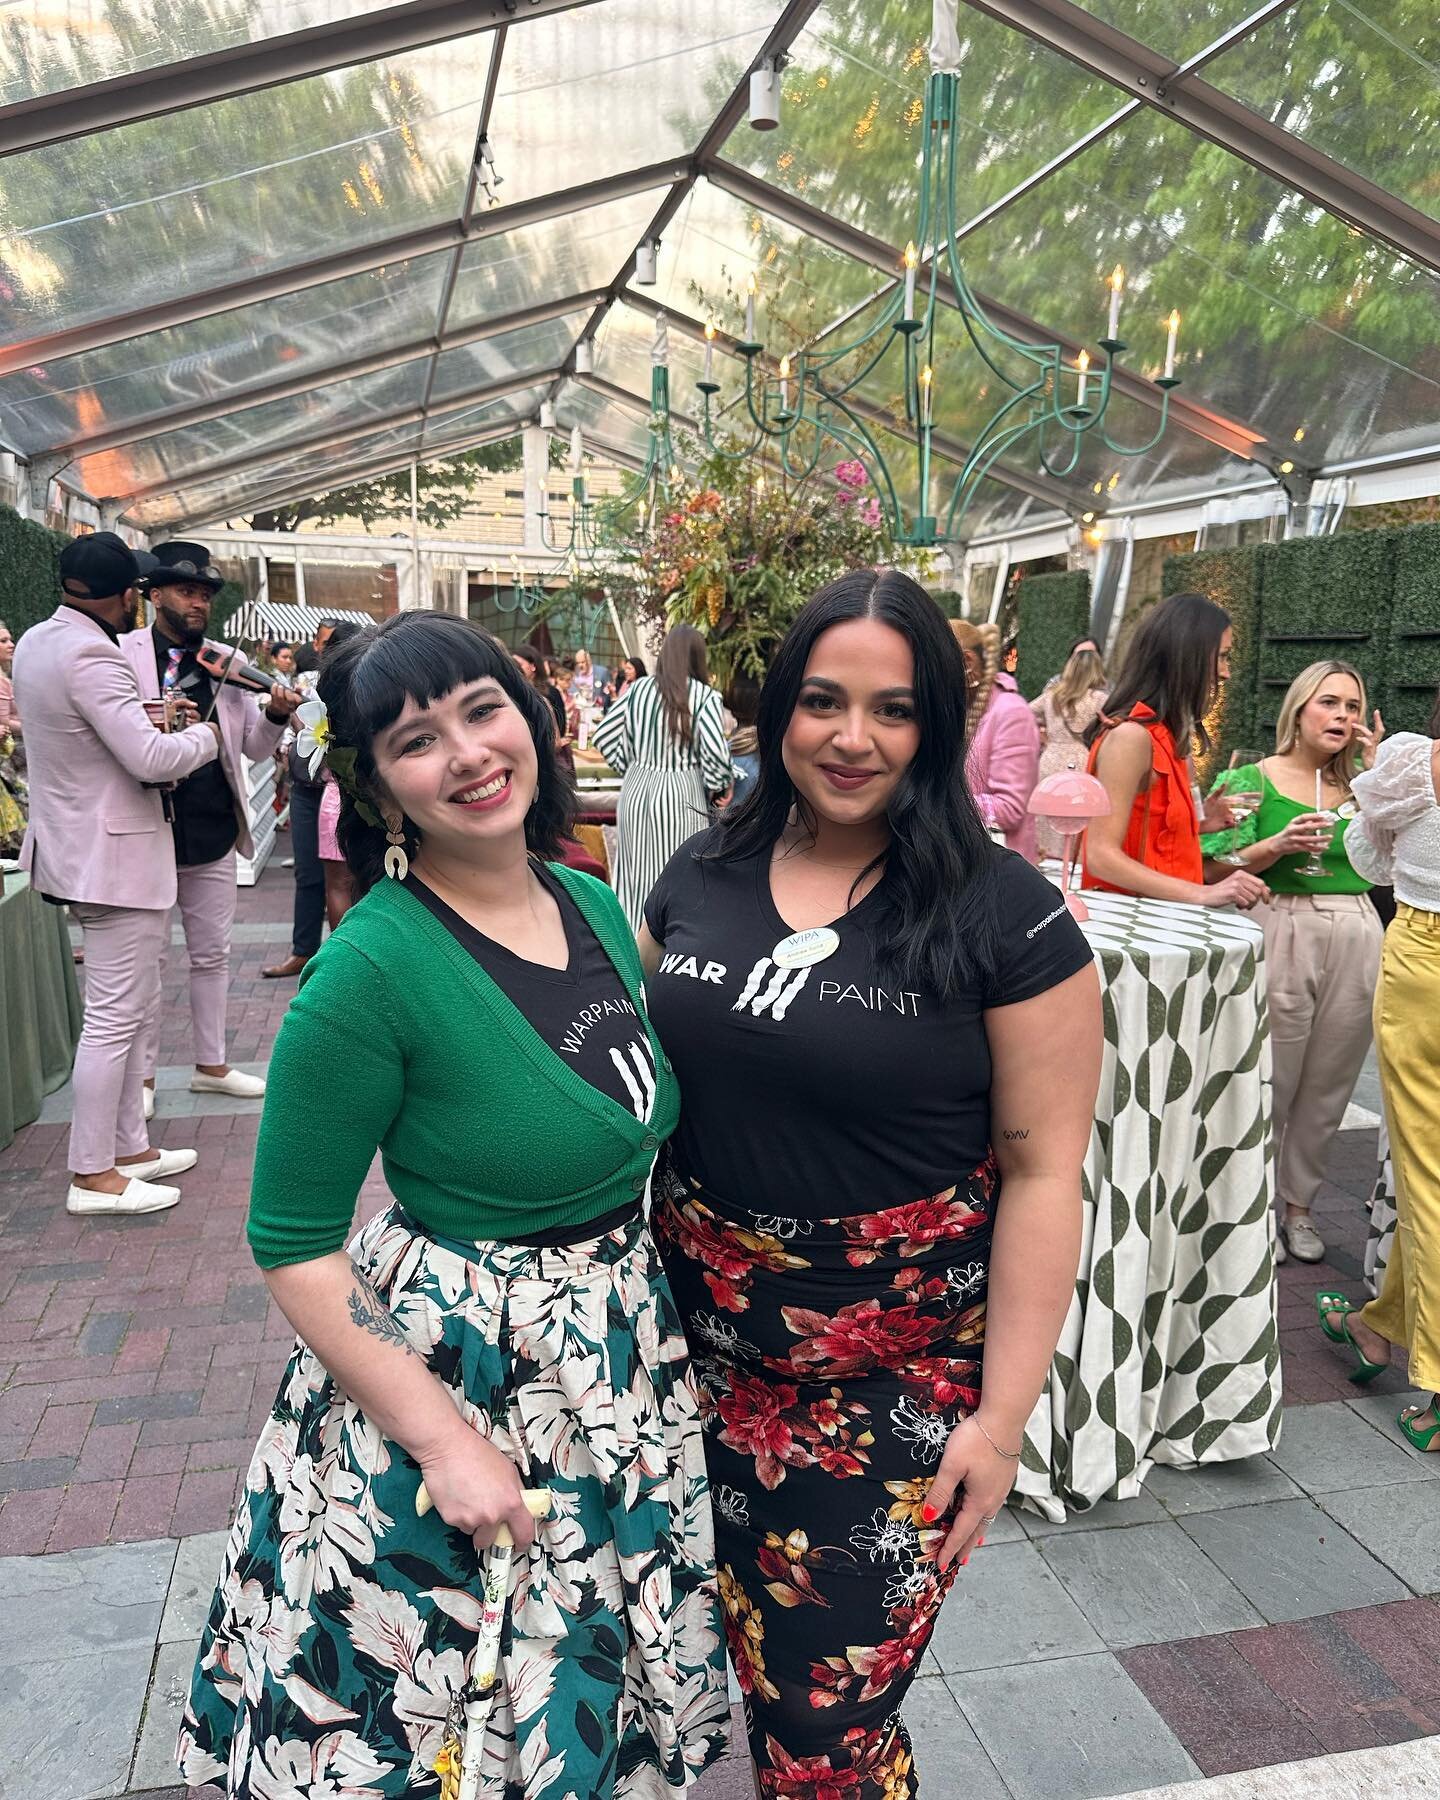 Our Chicago Operations Manager, Anna and Artisan Andrea had an amazing time at last nights @wipachicago event at @chicagoilluminatingcompany! It was quite the garden party! Thank you for a fabulous event. We are so proud to be WIPA members!

#wpichi 